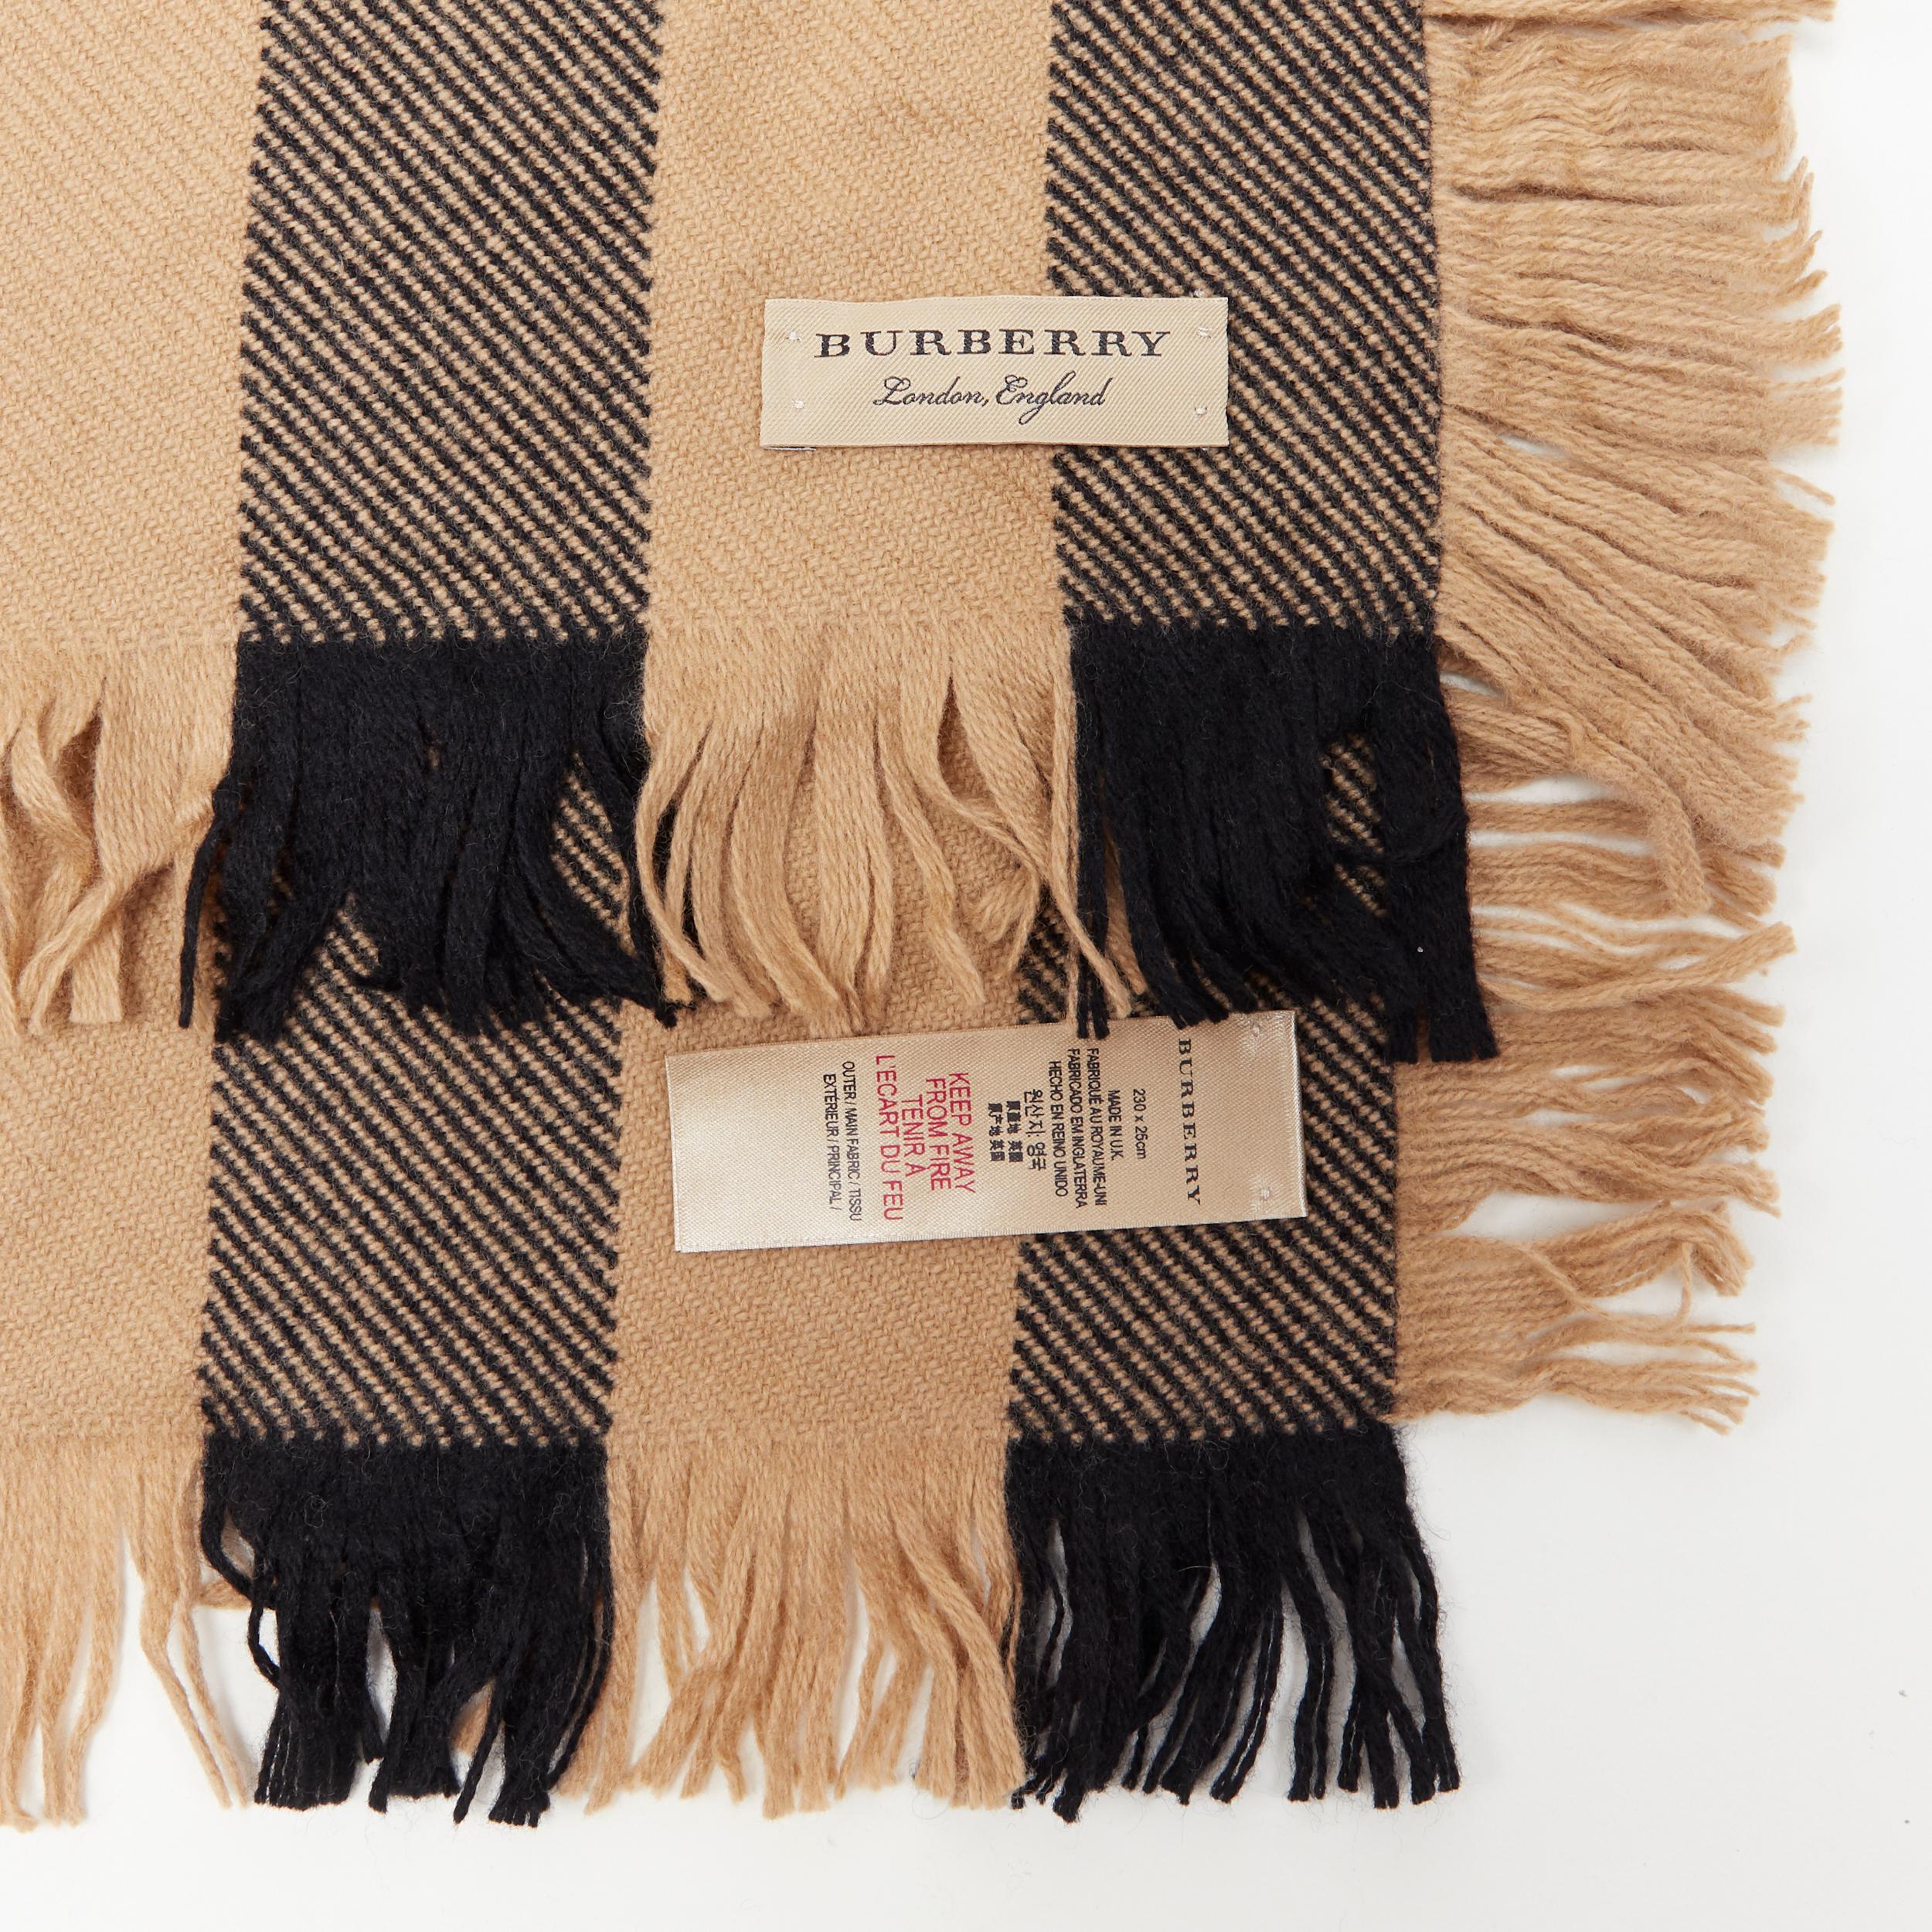 Beige new BURBERRY 100% wooll classic brown House Check fringe trimmed scarf